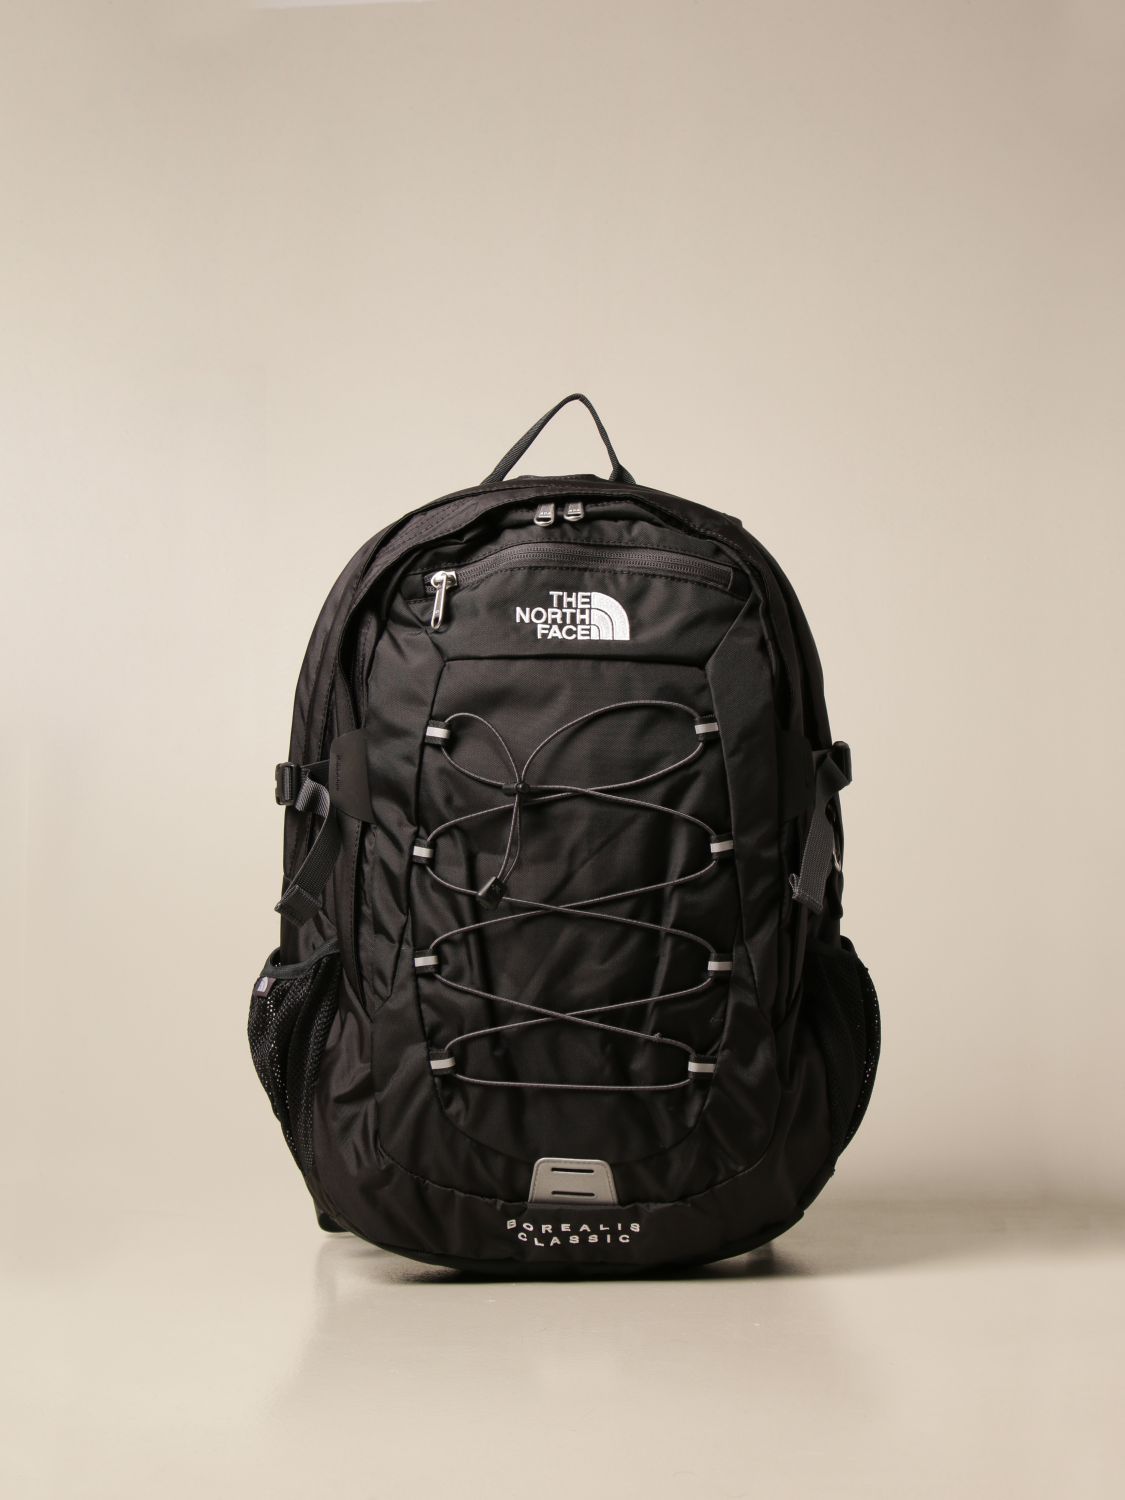 north face backpacking backpacks